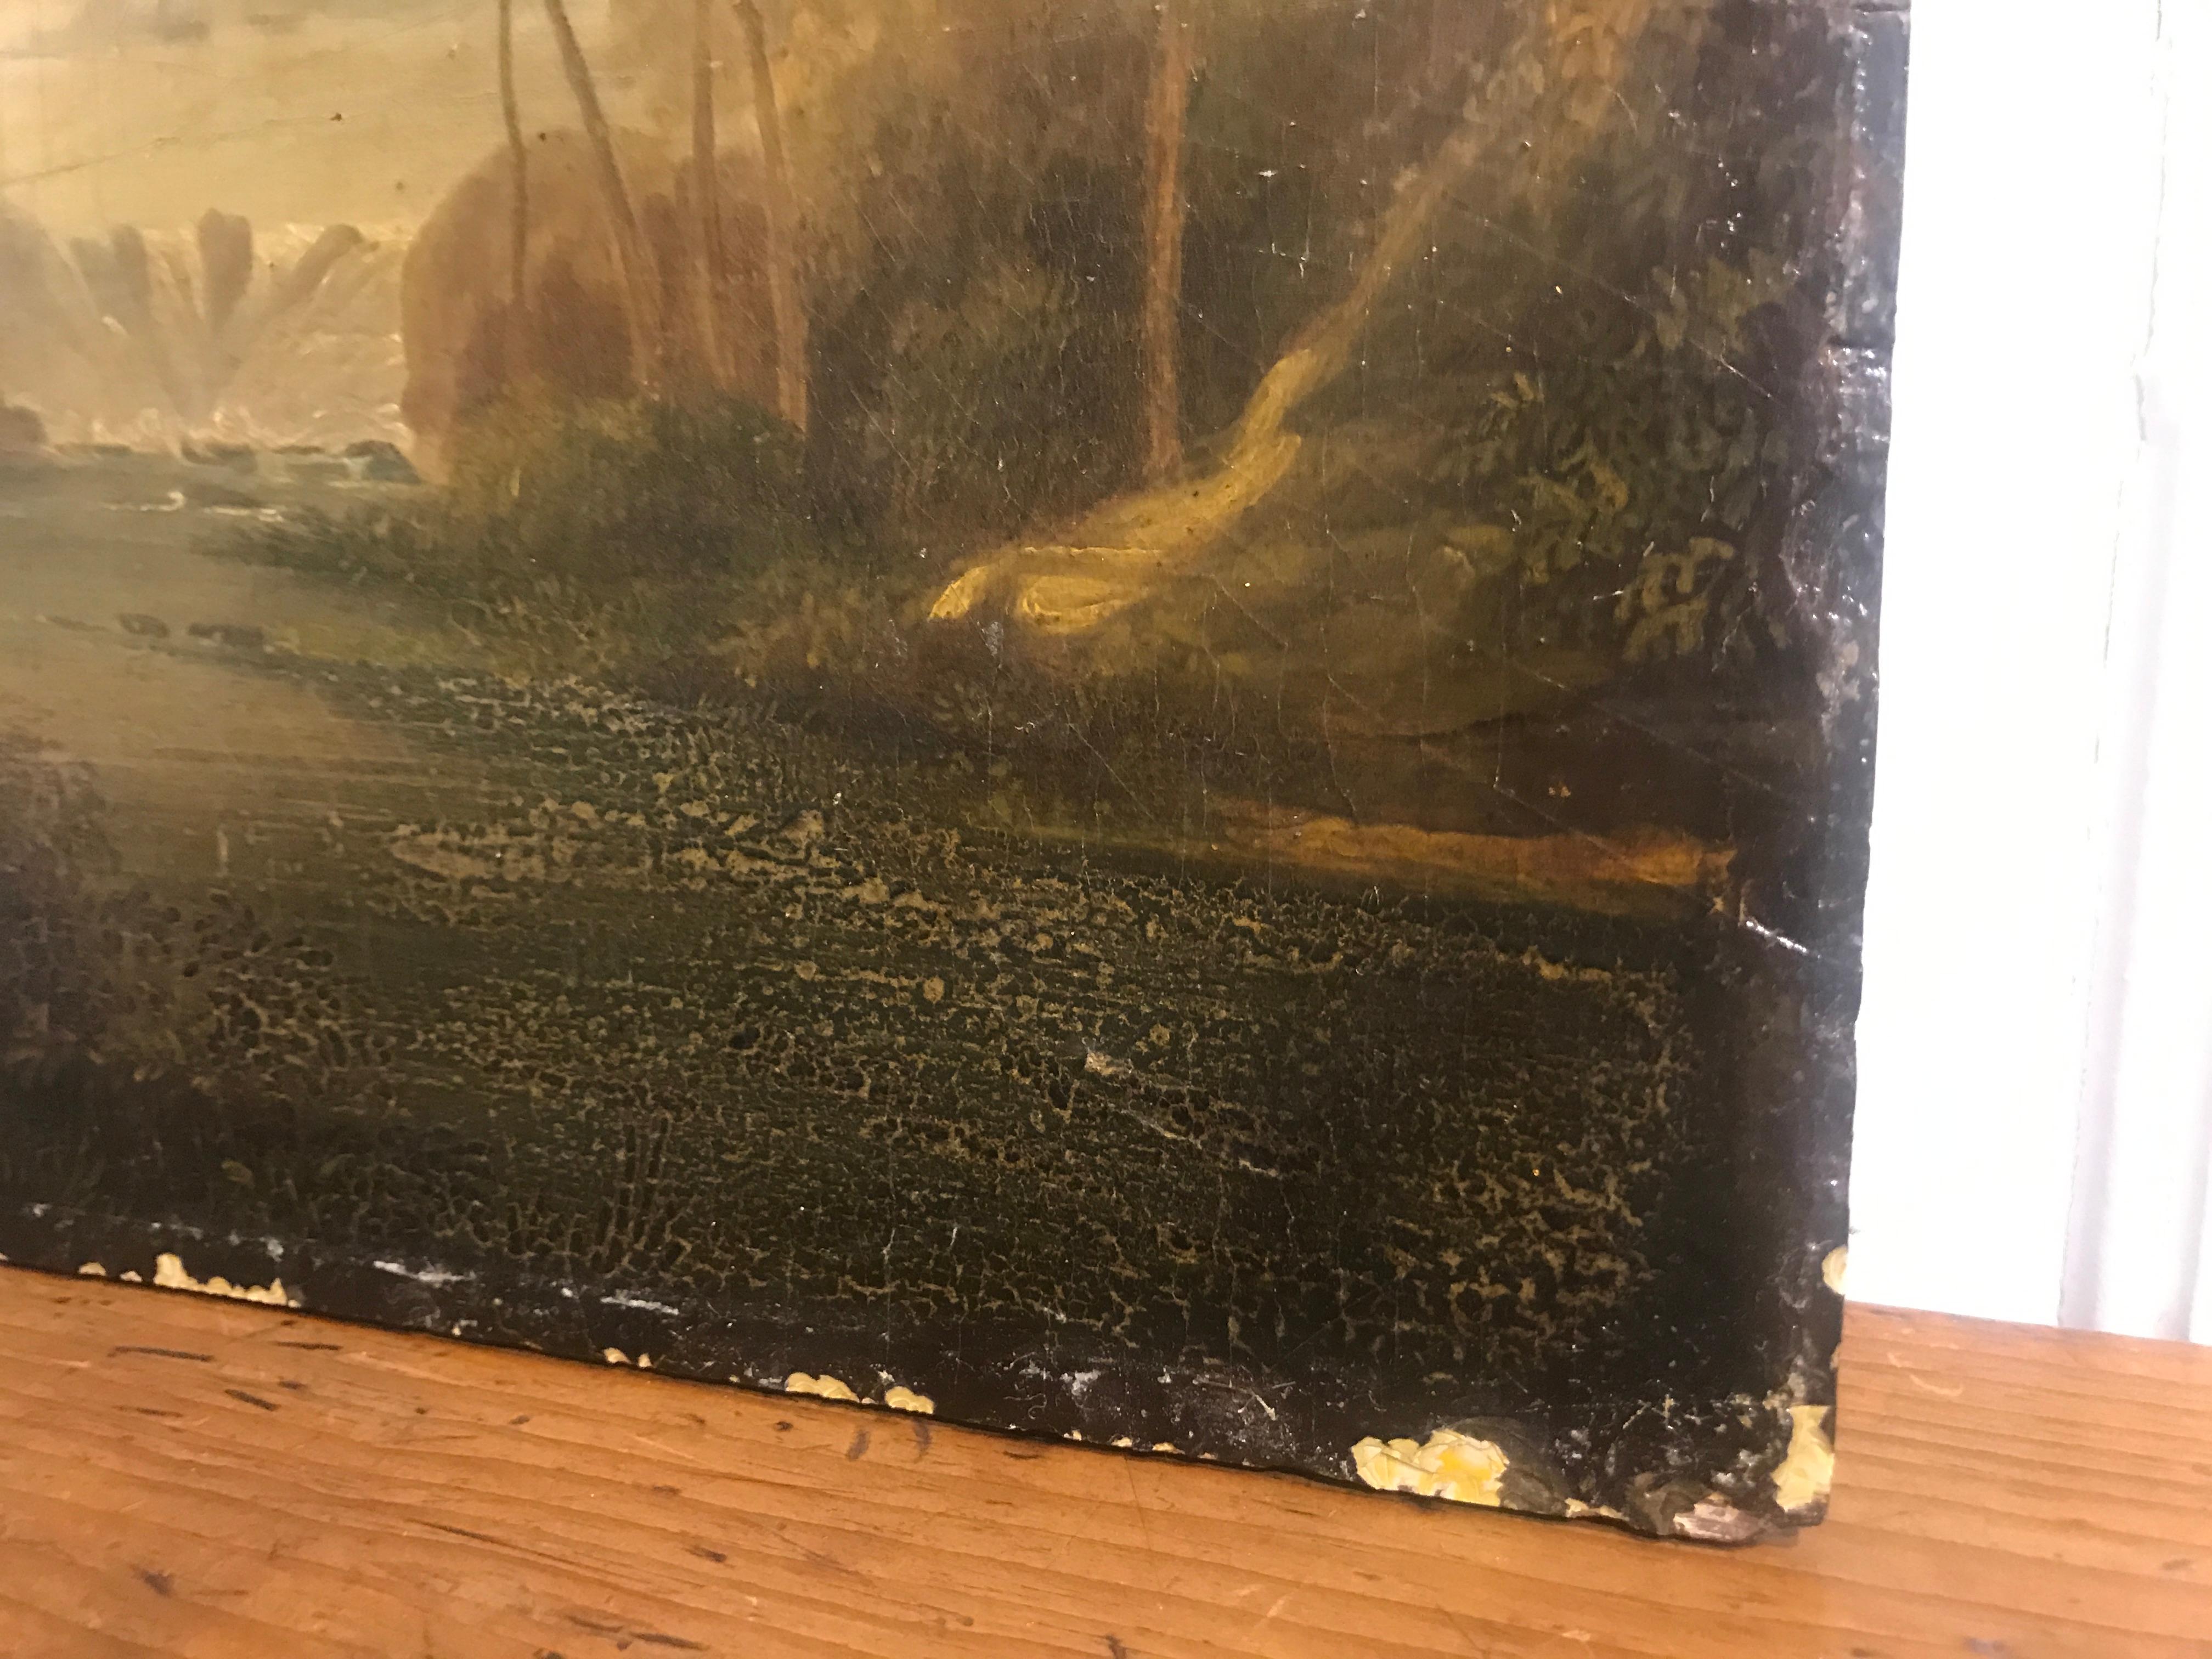 This small rectangular oil on board landscape painting was created in the 18th century and is unframed. Presenting a nicely weathered appearance witnessing its age and history, the painting features three figures wearing hats, traveling by foot or